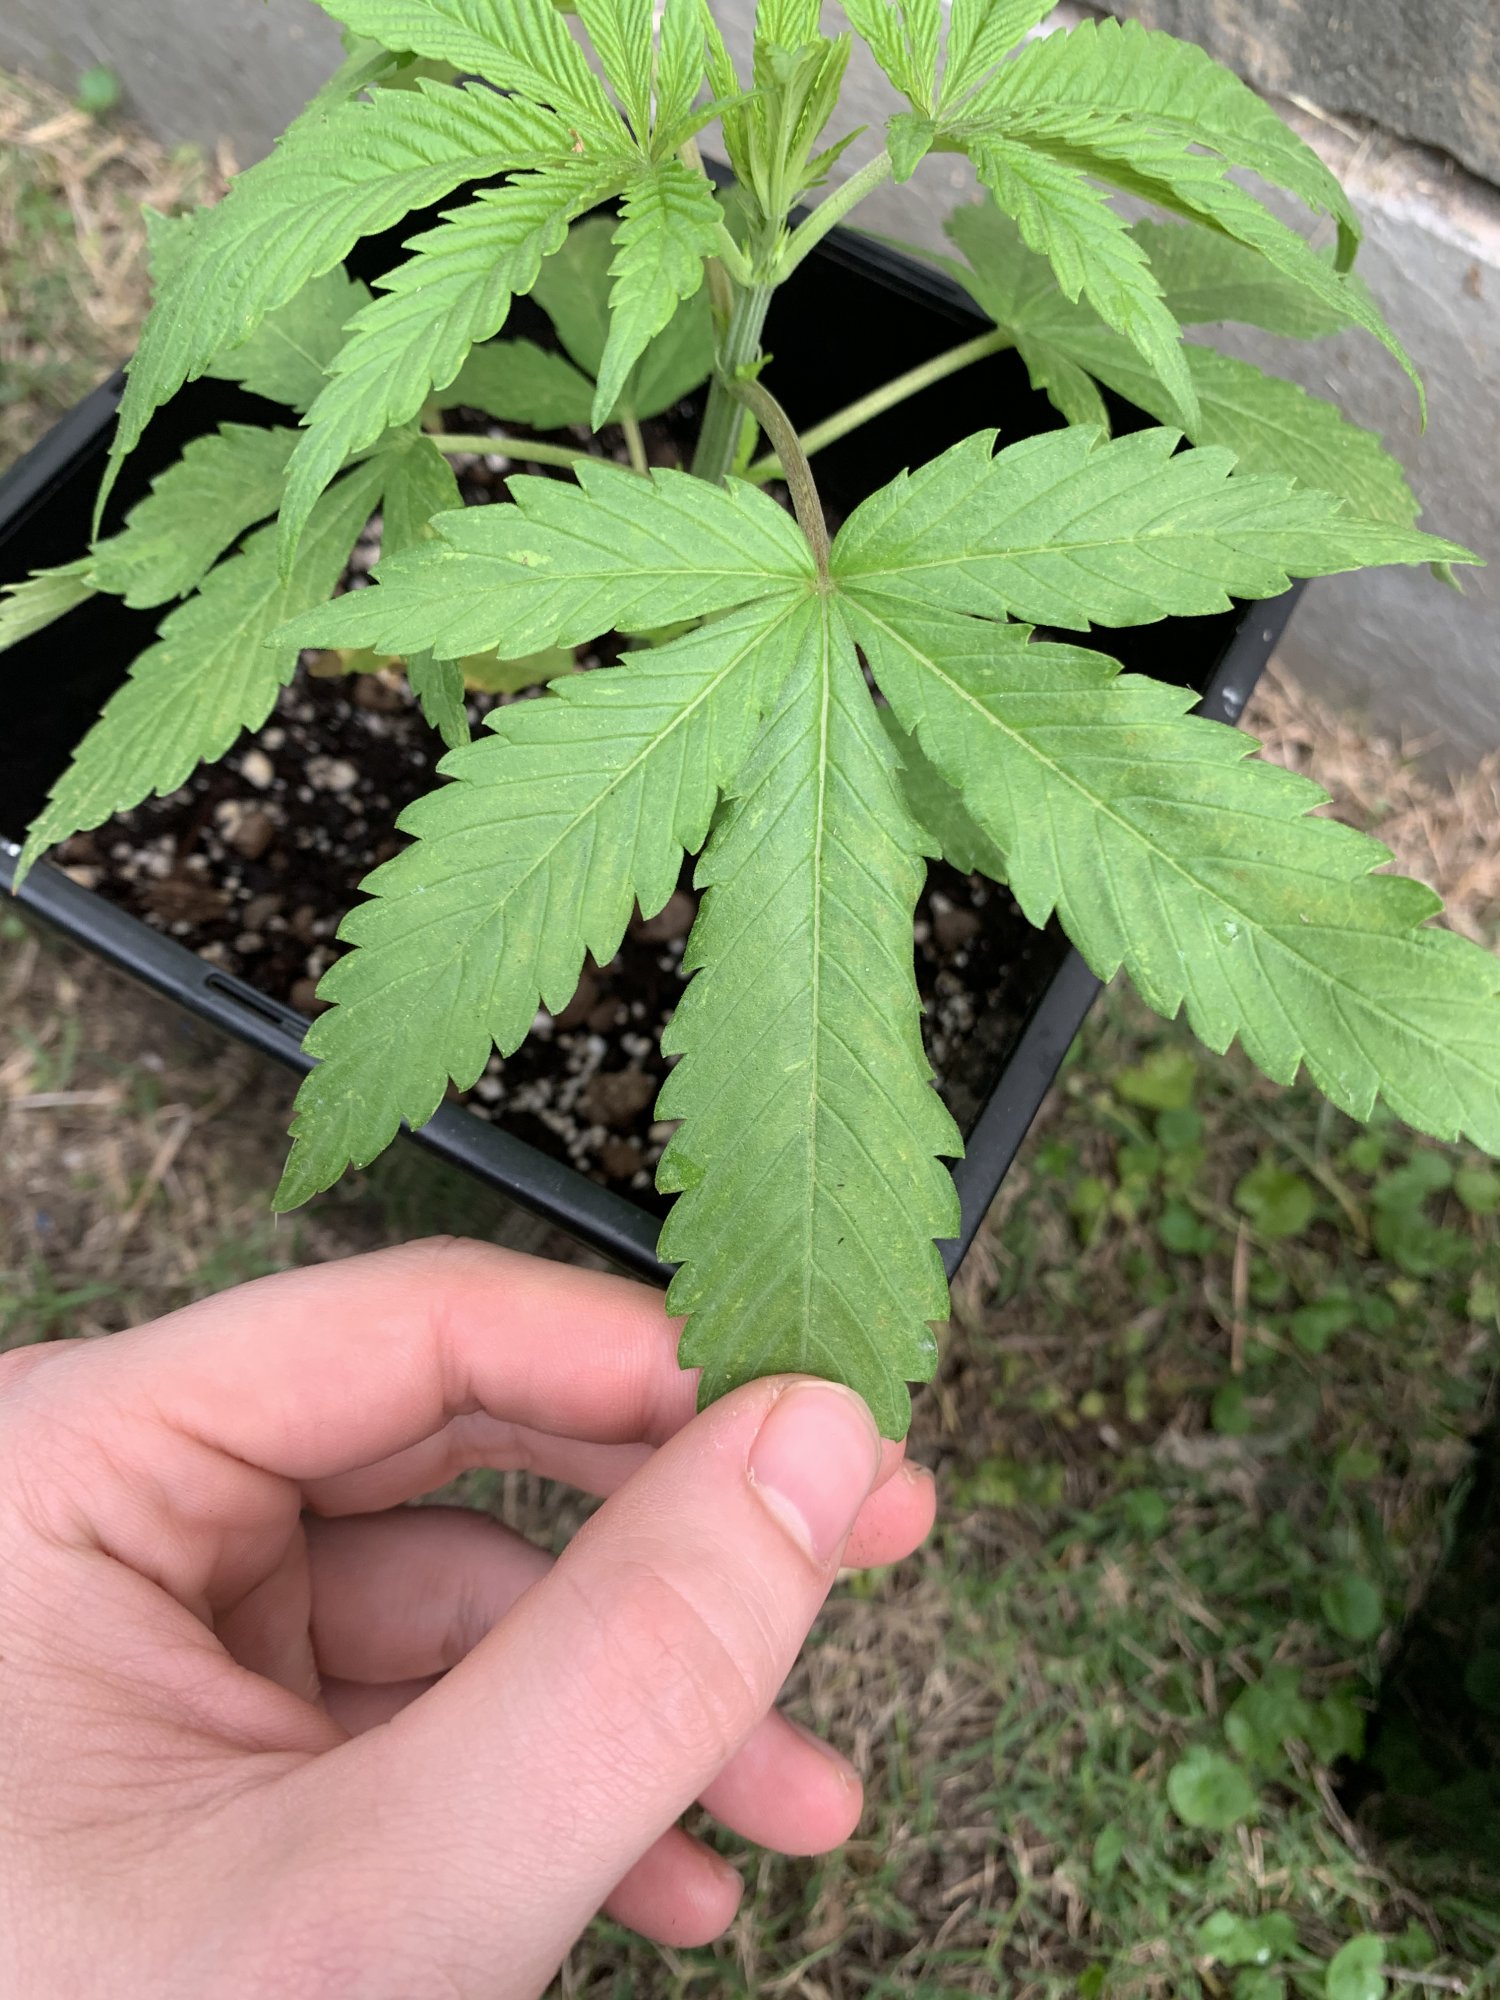 Is this a nute deficiency